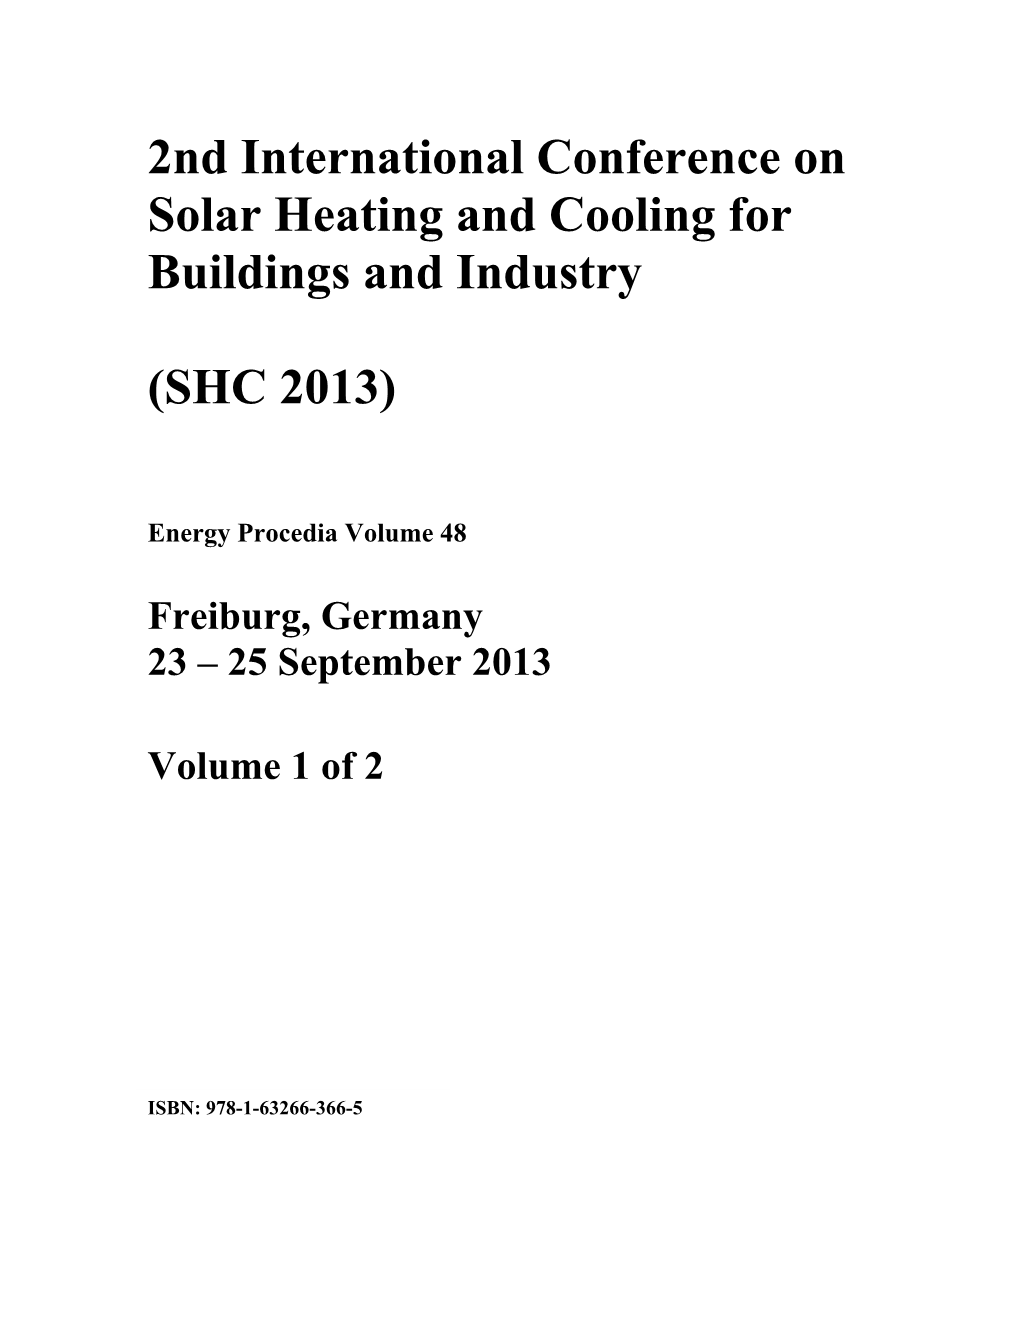 Investigations of Intelligent Solar Heating Systems for Single Family House